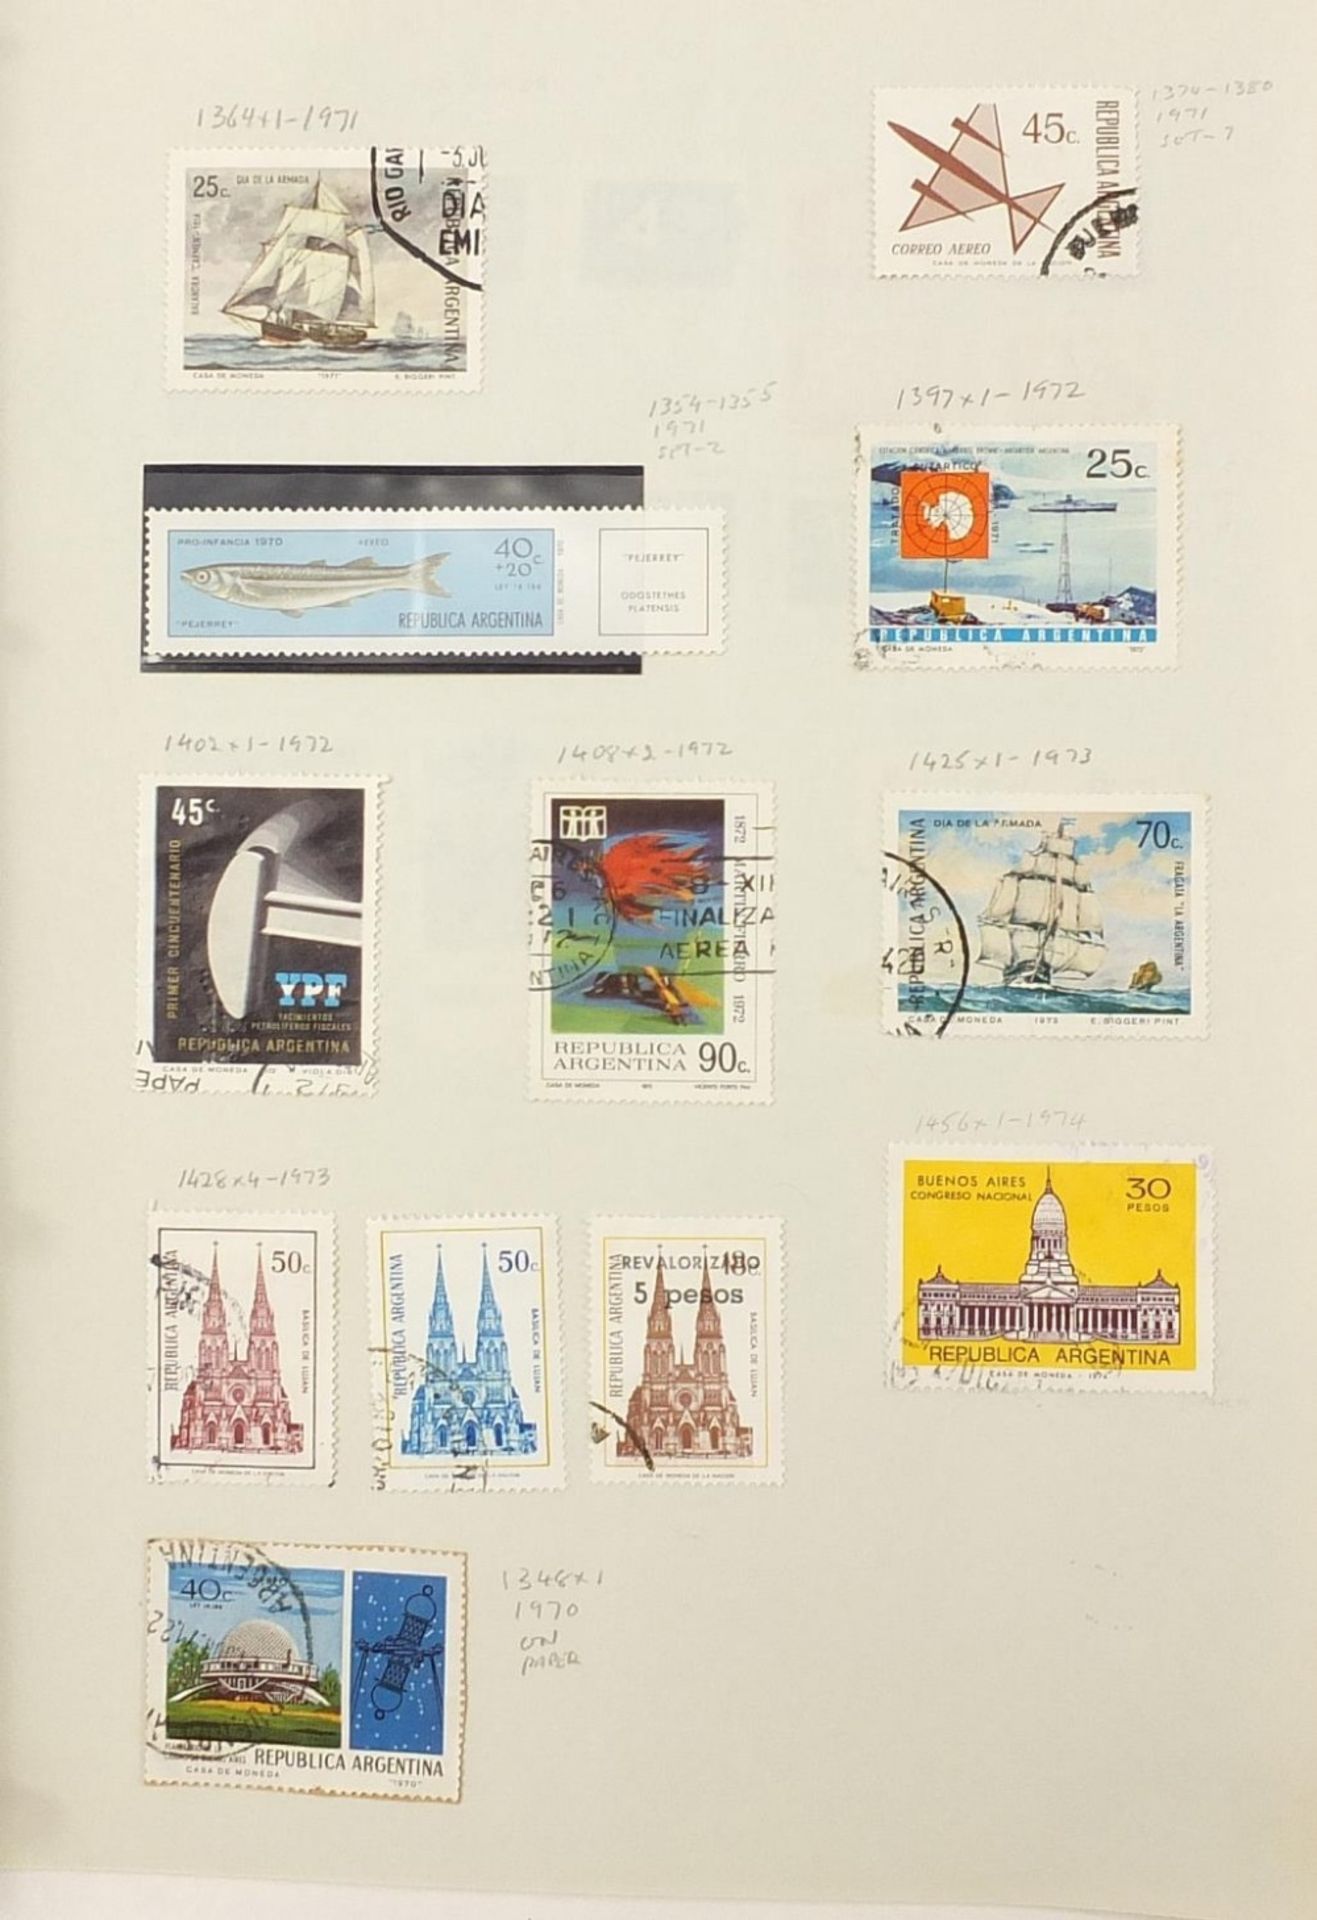 Extensive collection of antique and later world stamps arranged in albums including Brazil, - Image 9 of 52